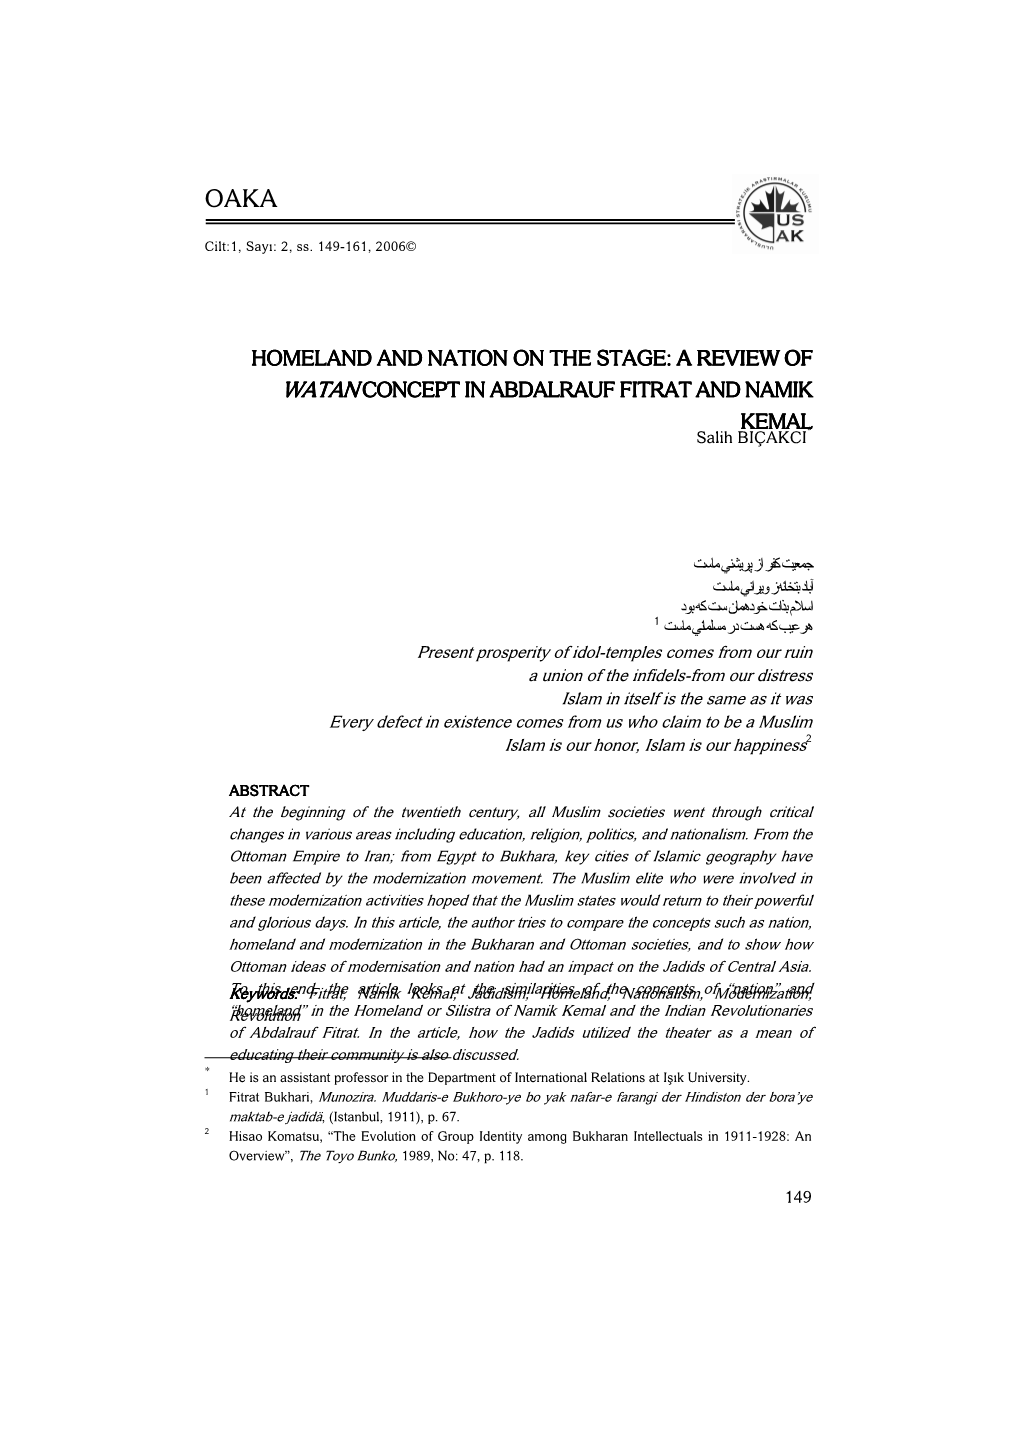 A Review of a Review of Watanconcept in Abdalrauf Fitrat